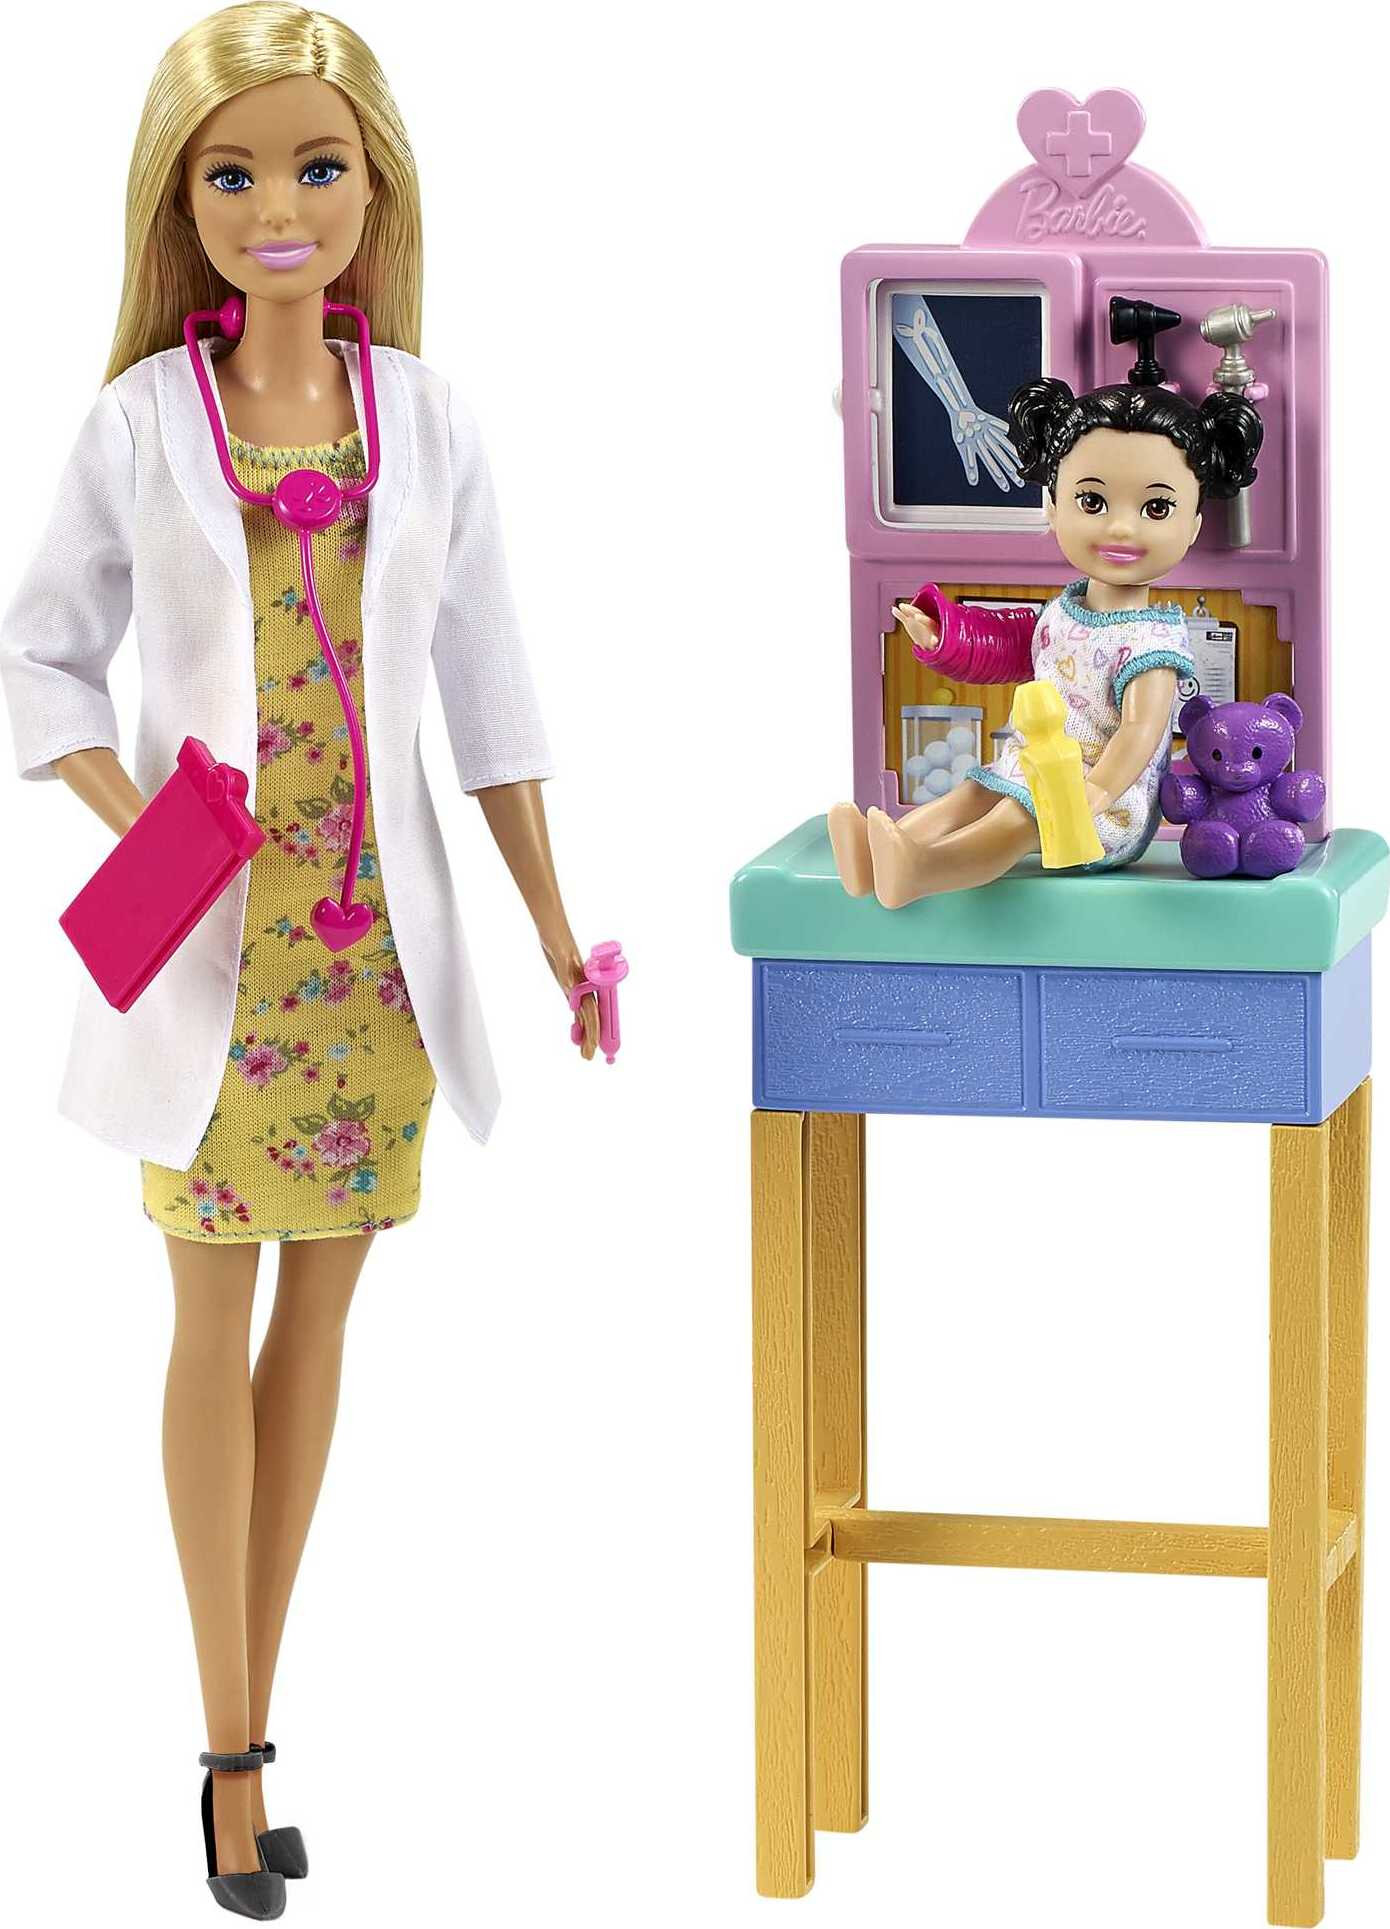 Barbie Careers Pediatrician Playset with Blonde Fashion Doll, 1 Small Doll, Furniture & Accessories - image 1 of 7